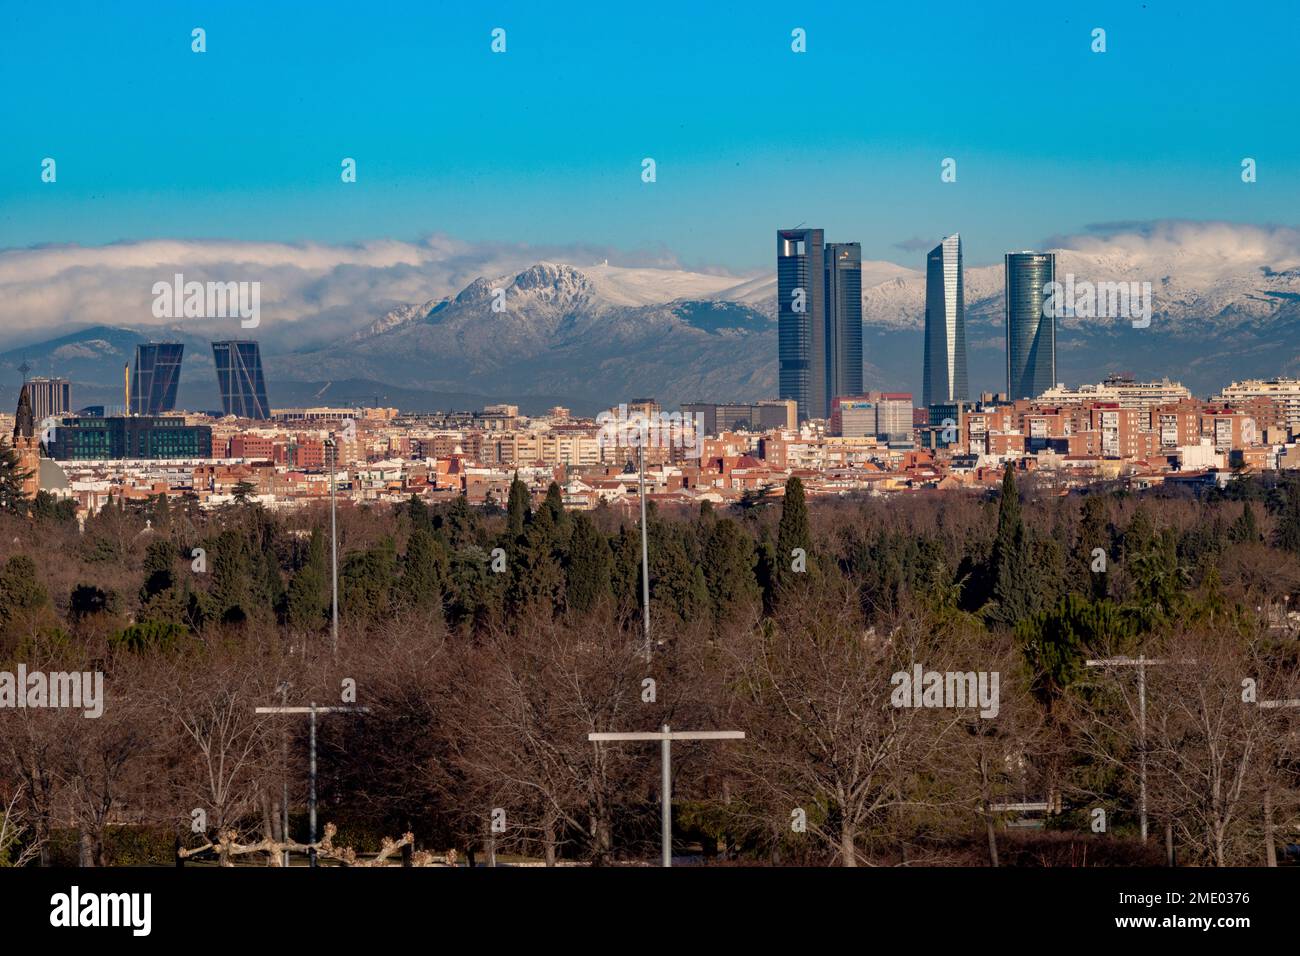 Madrid. Pollution. Contamination. Views of the city of Madrid with a gray and brown layer of pollution beret over the city. Sierra de Guadarrama with Stock Photo